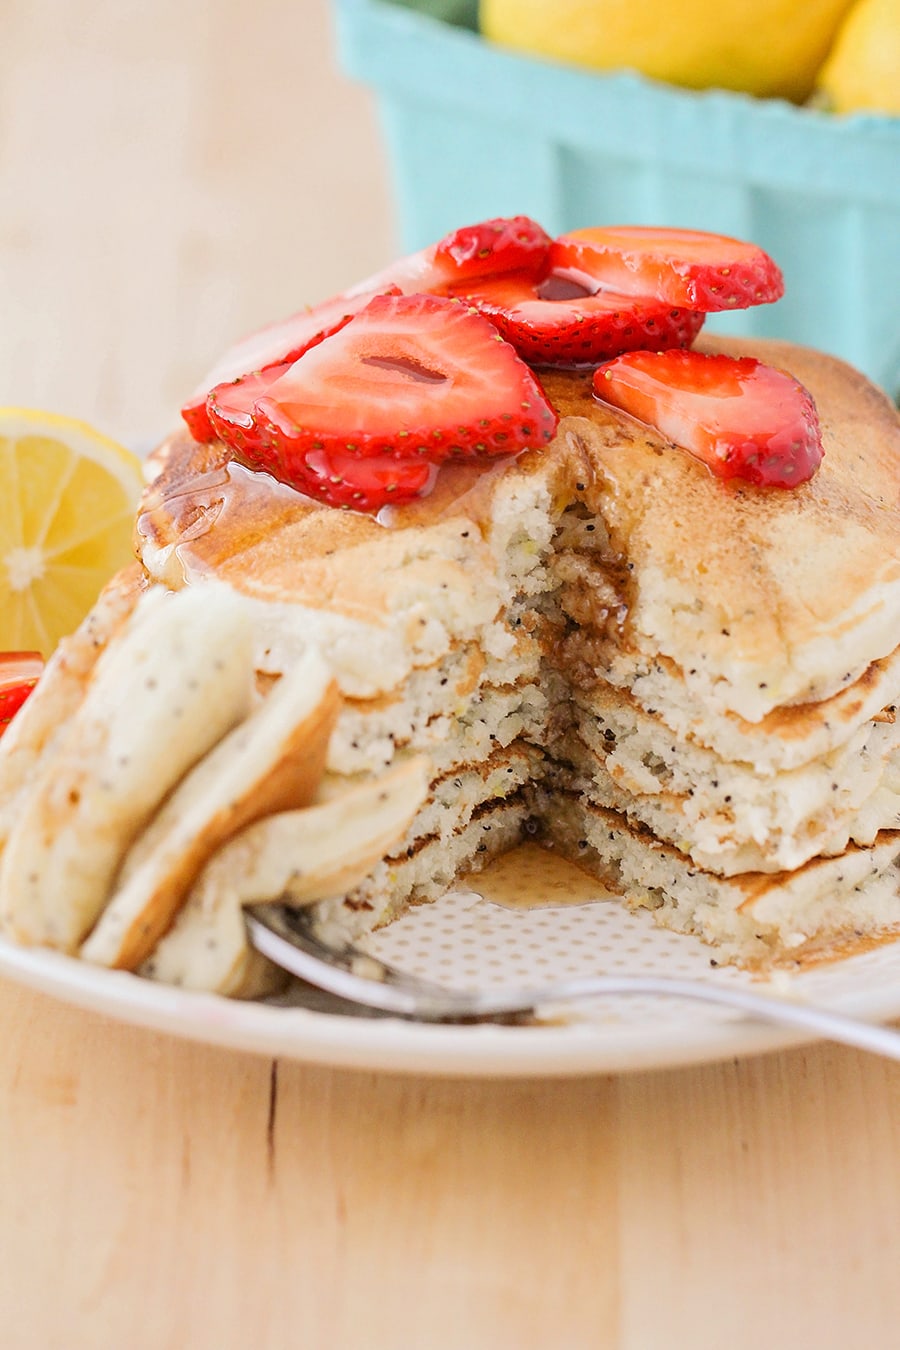 Lemon poppyseed pancakes topped with strawberries and syrup on a white plate